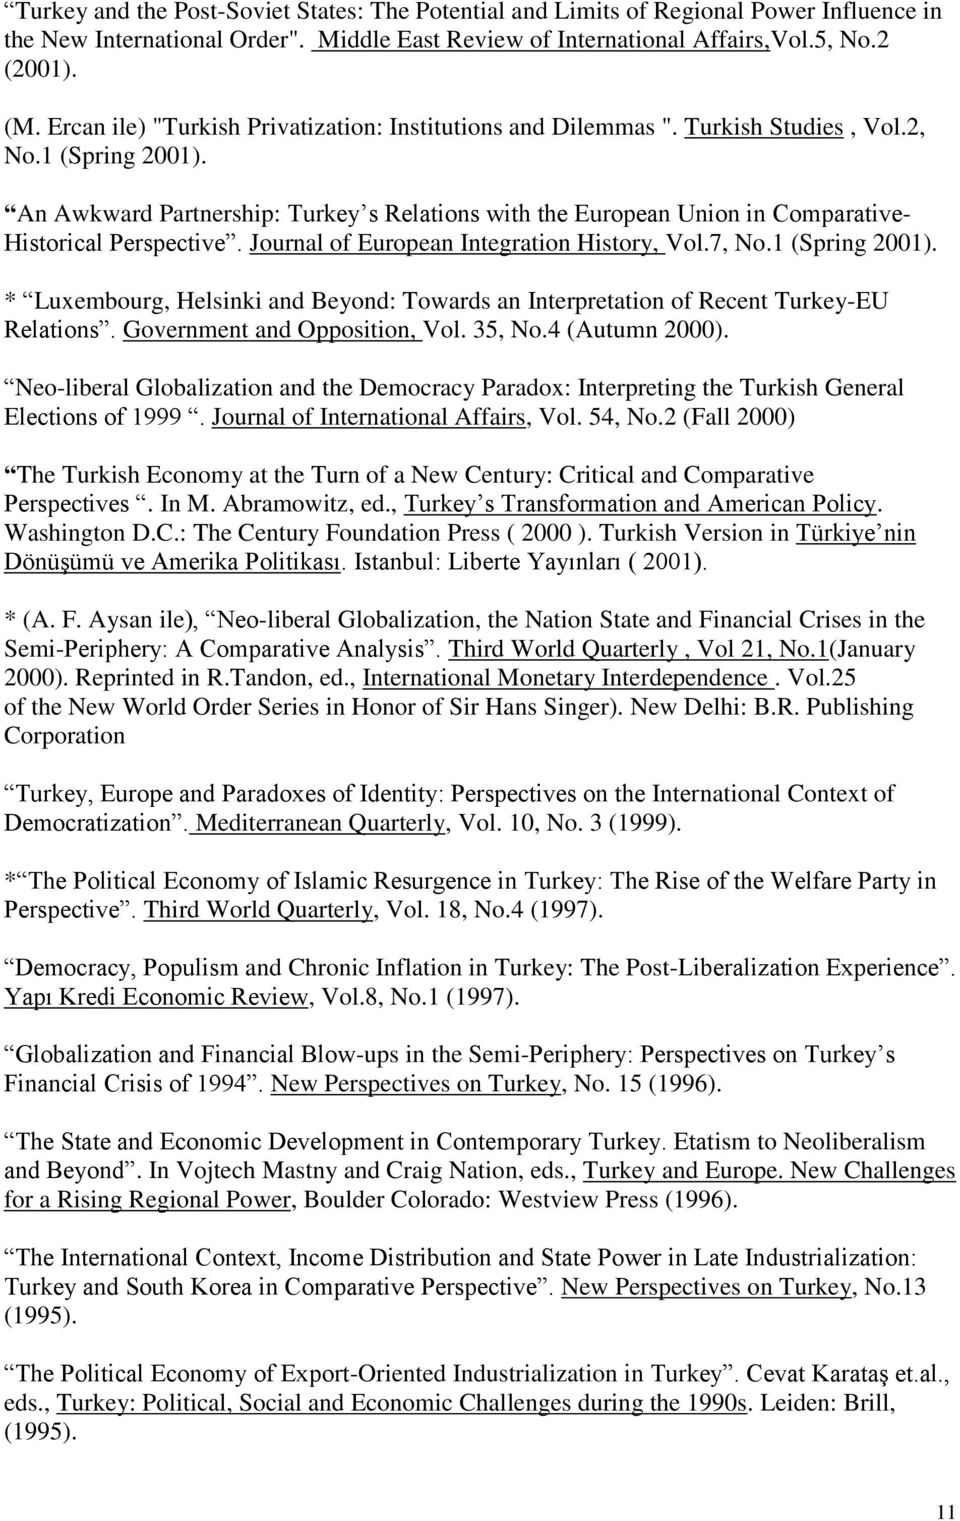 An Awkward Partnership: Turkey s Relations with the European Union in Comparative- Historical Perspective. Journal of European Integration History, Vol.7, No.1 (Spring 2001).